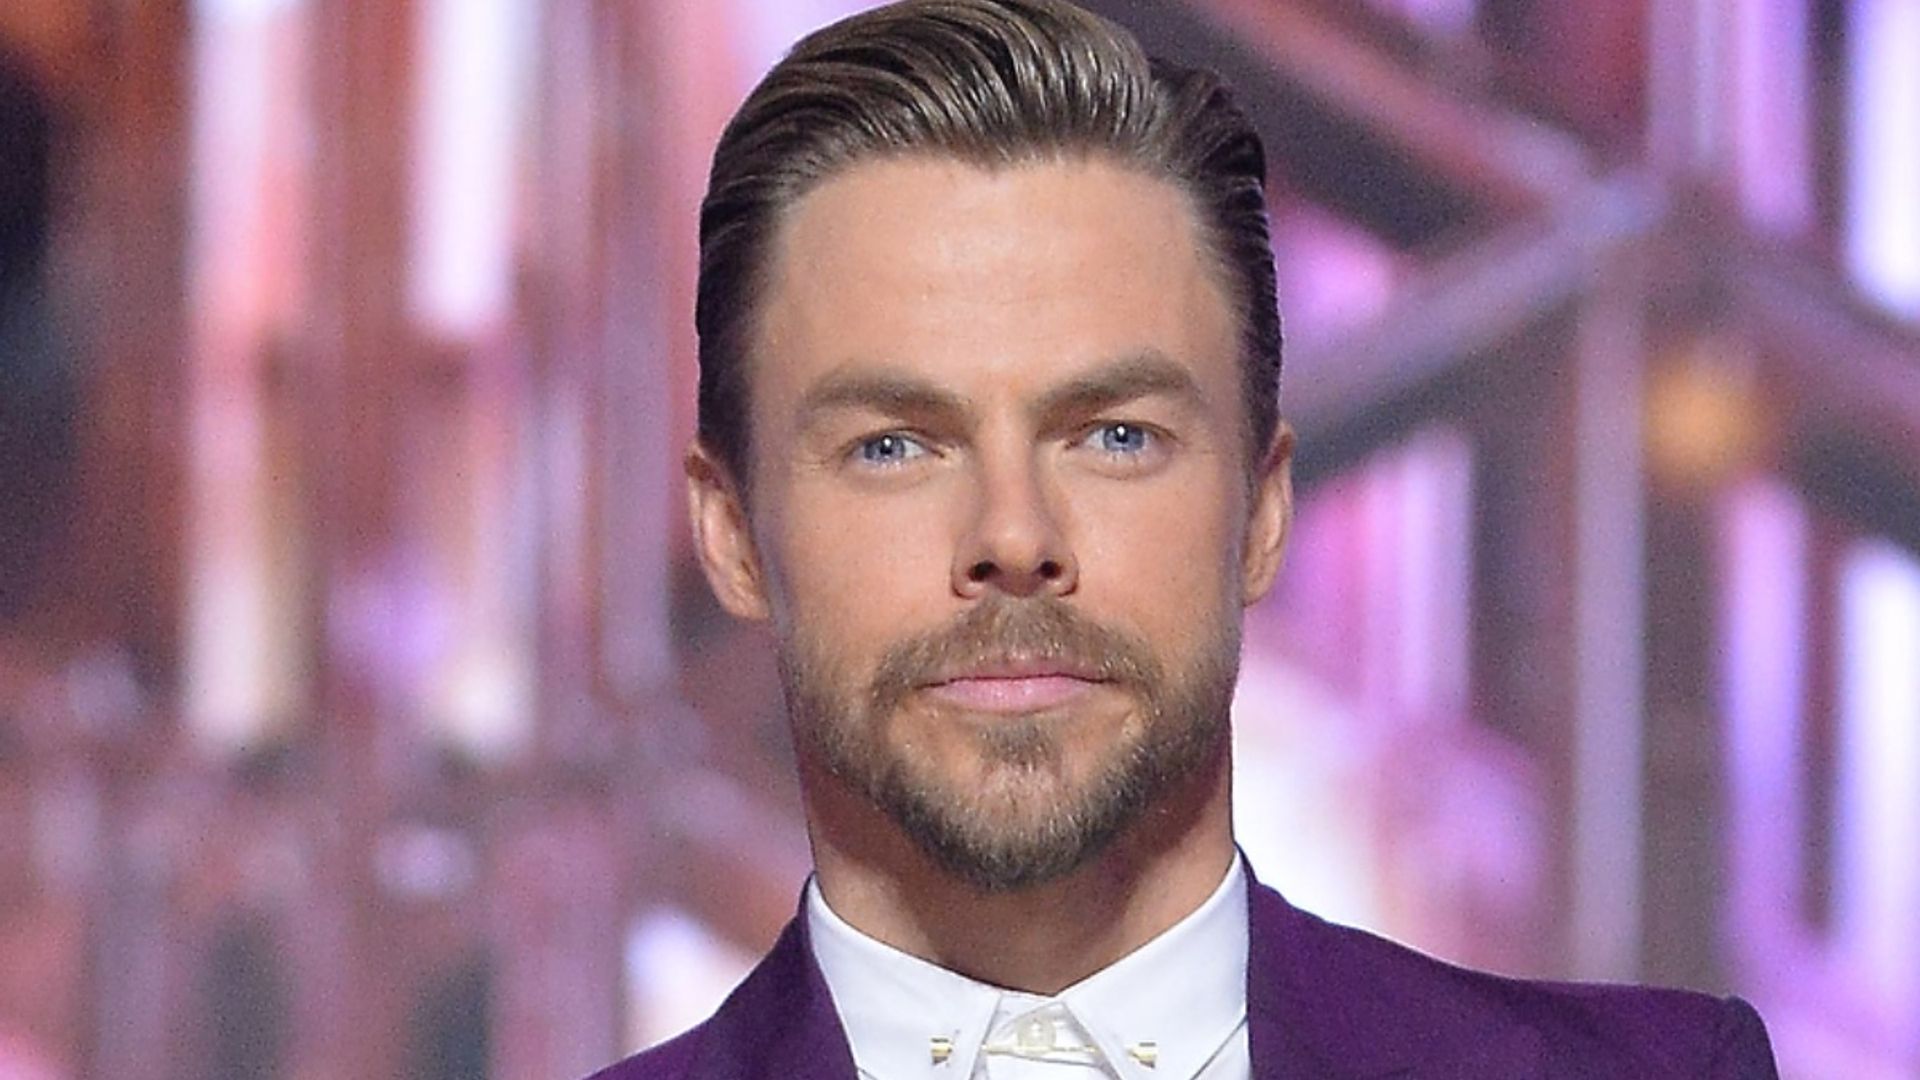 DWTS’ Derek Hough shares heartbreaking health update with fans as he announces bad news